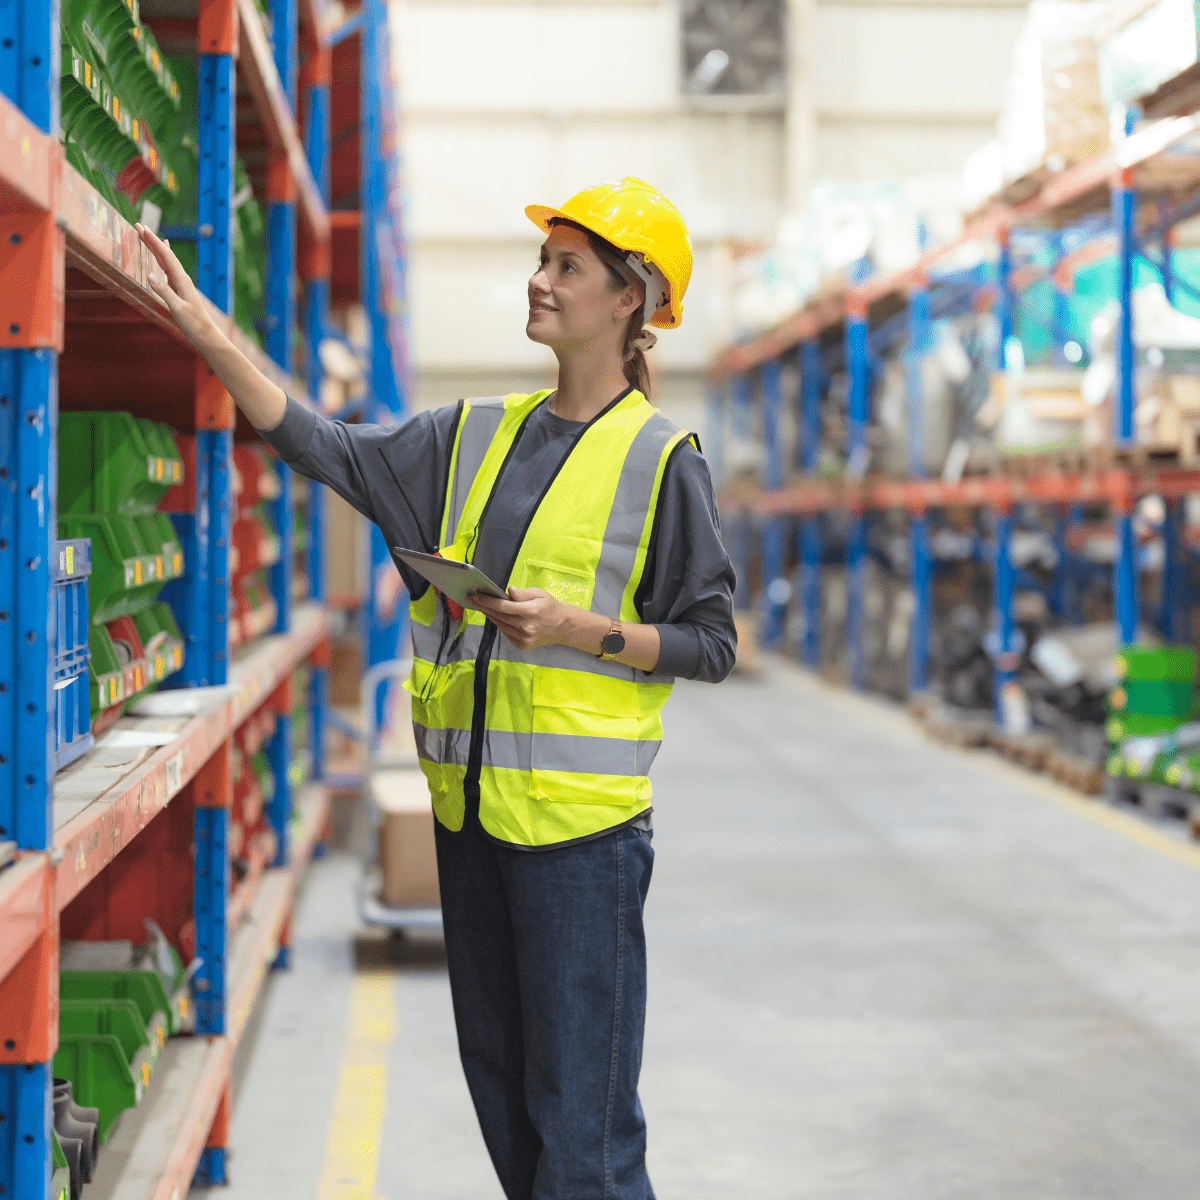 Female warehouse worker in yellow hard hat auditing inventory levels, reflecting diligent CDM practices in stock management and safety.